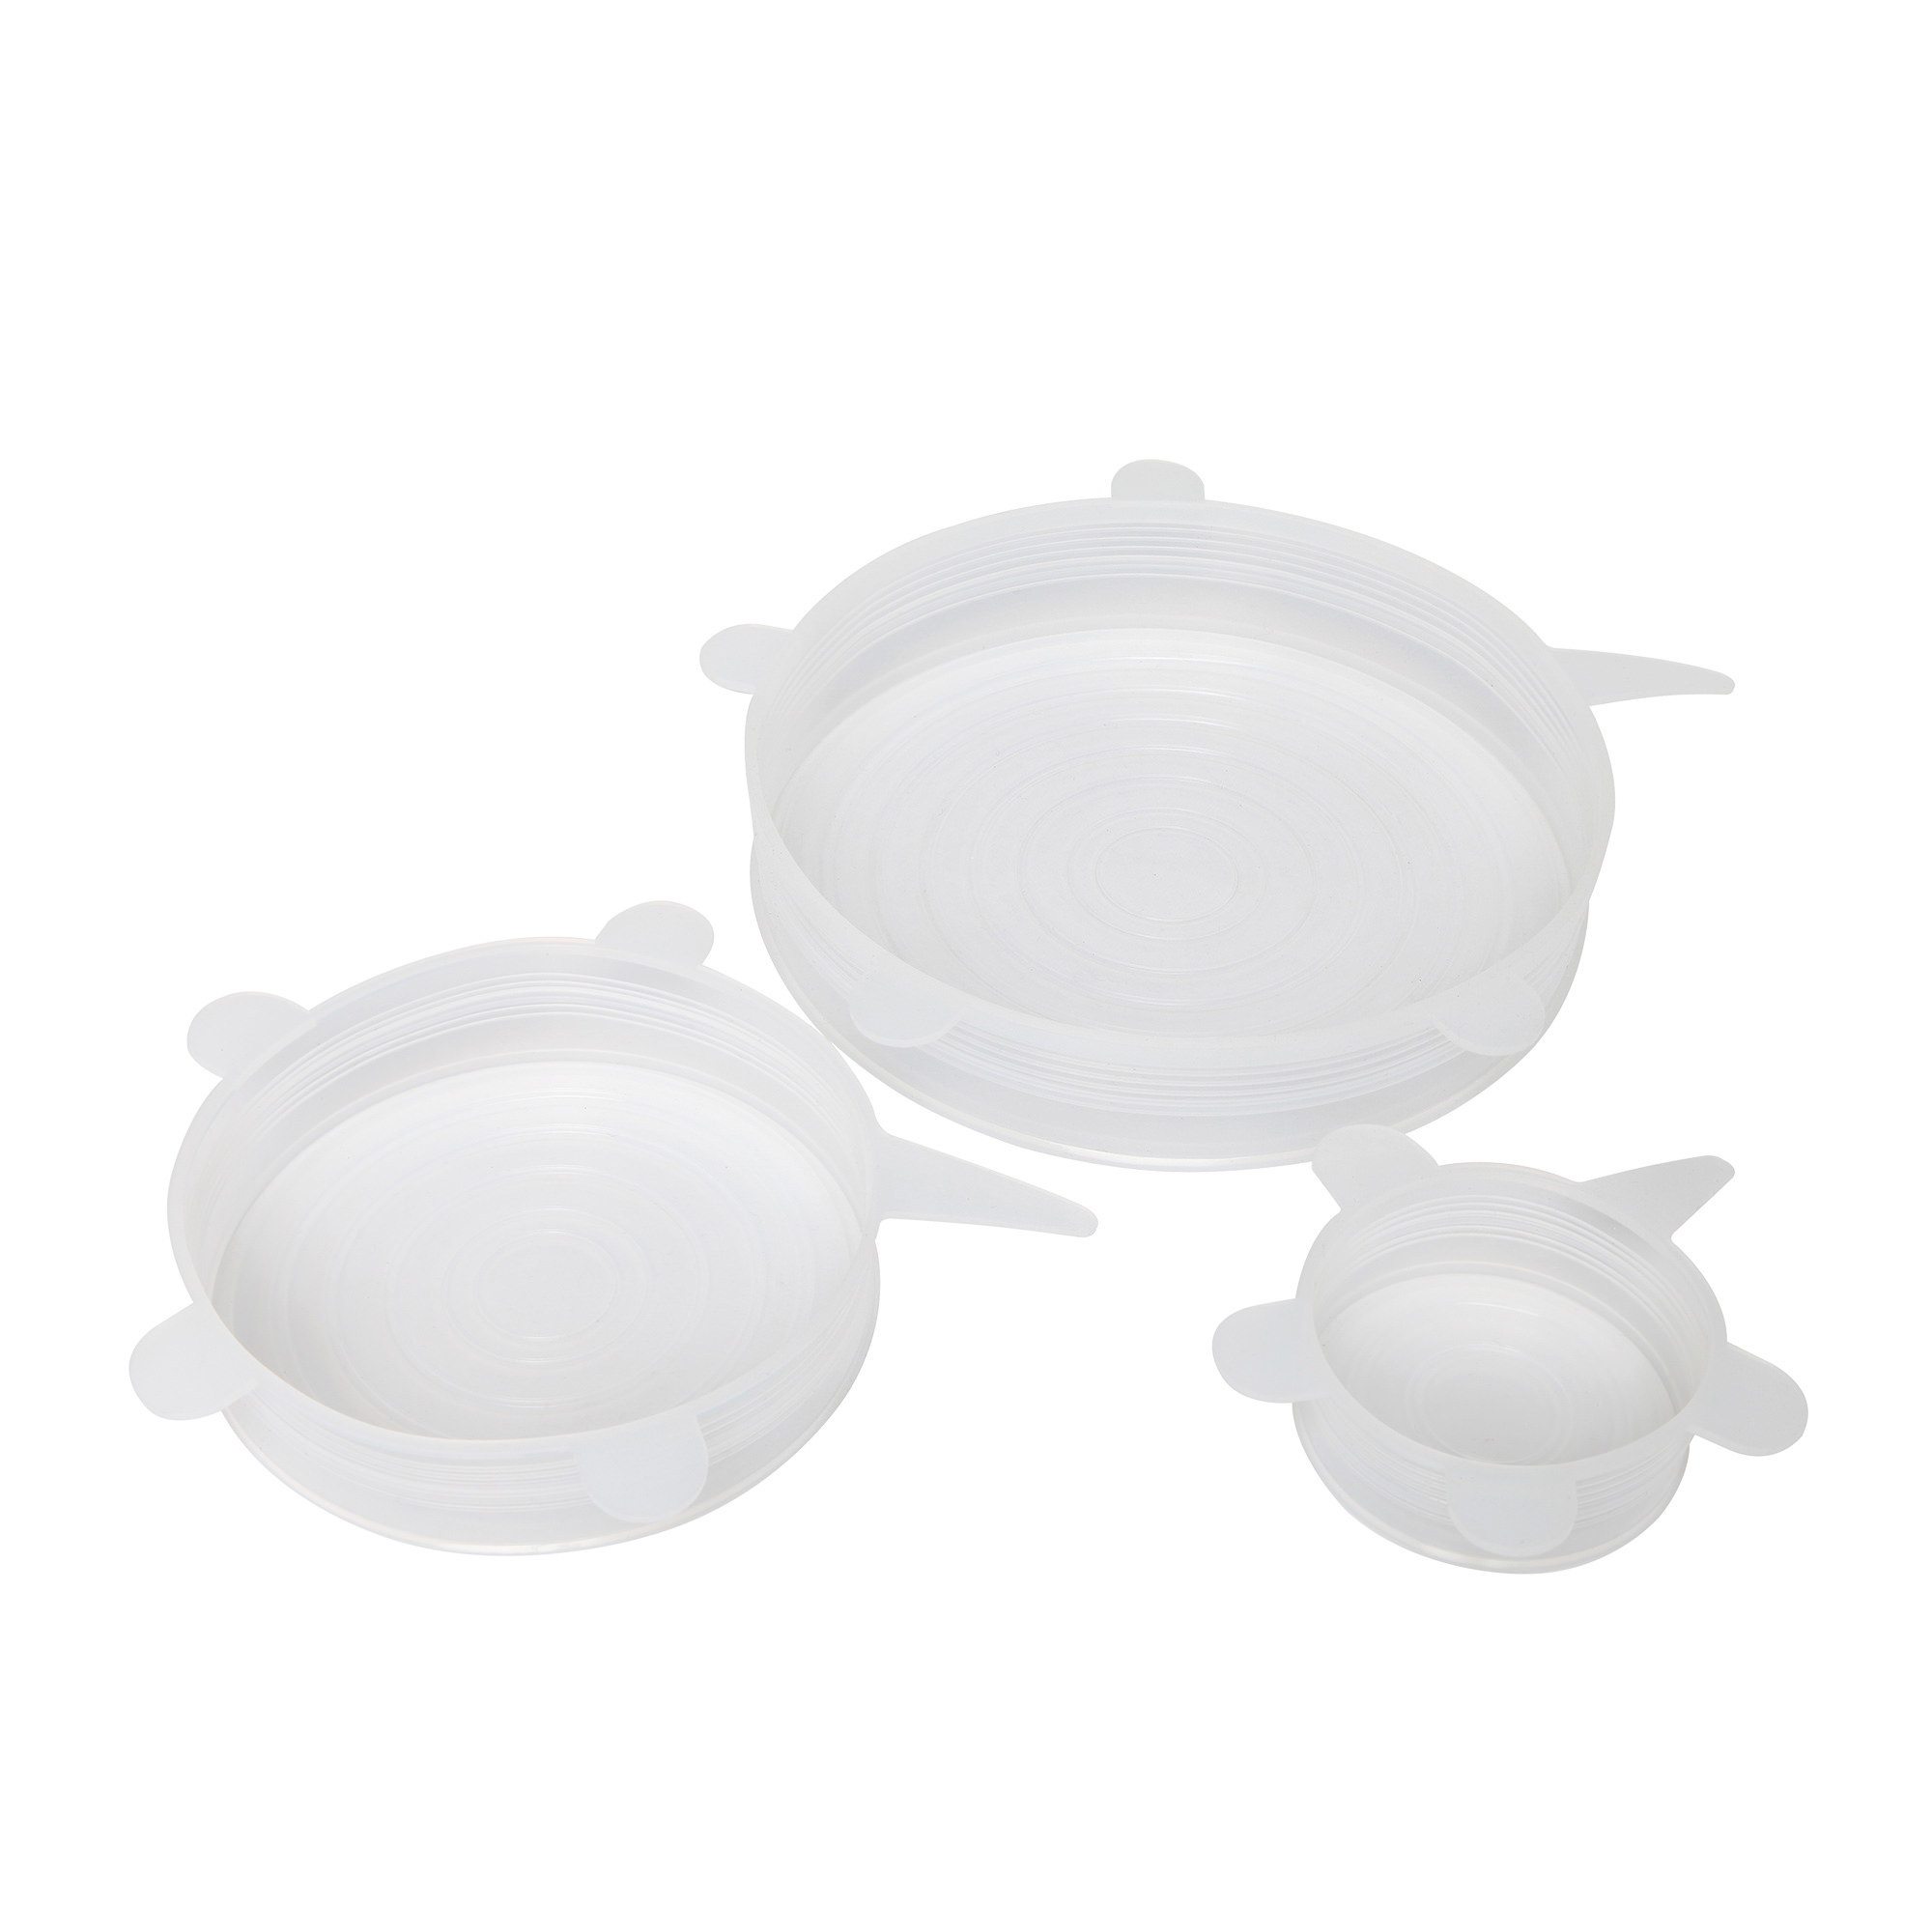 Wiltshire Silicone Bowl Covers Set 3pc Image 1